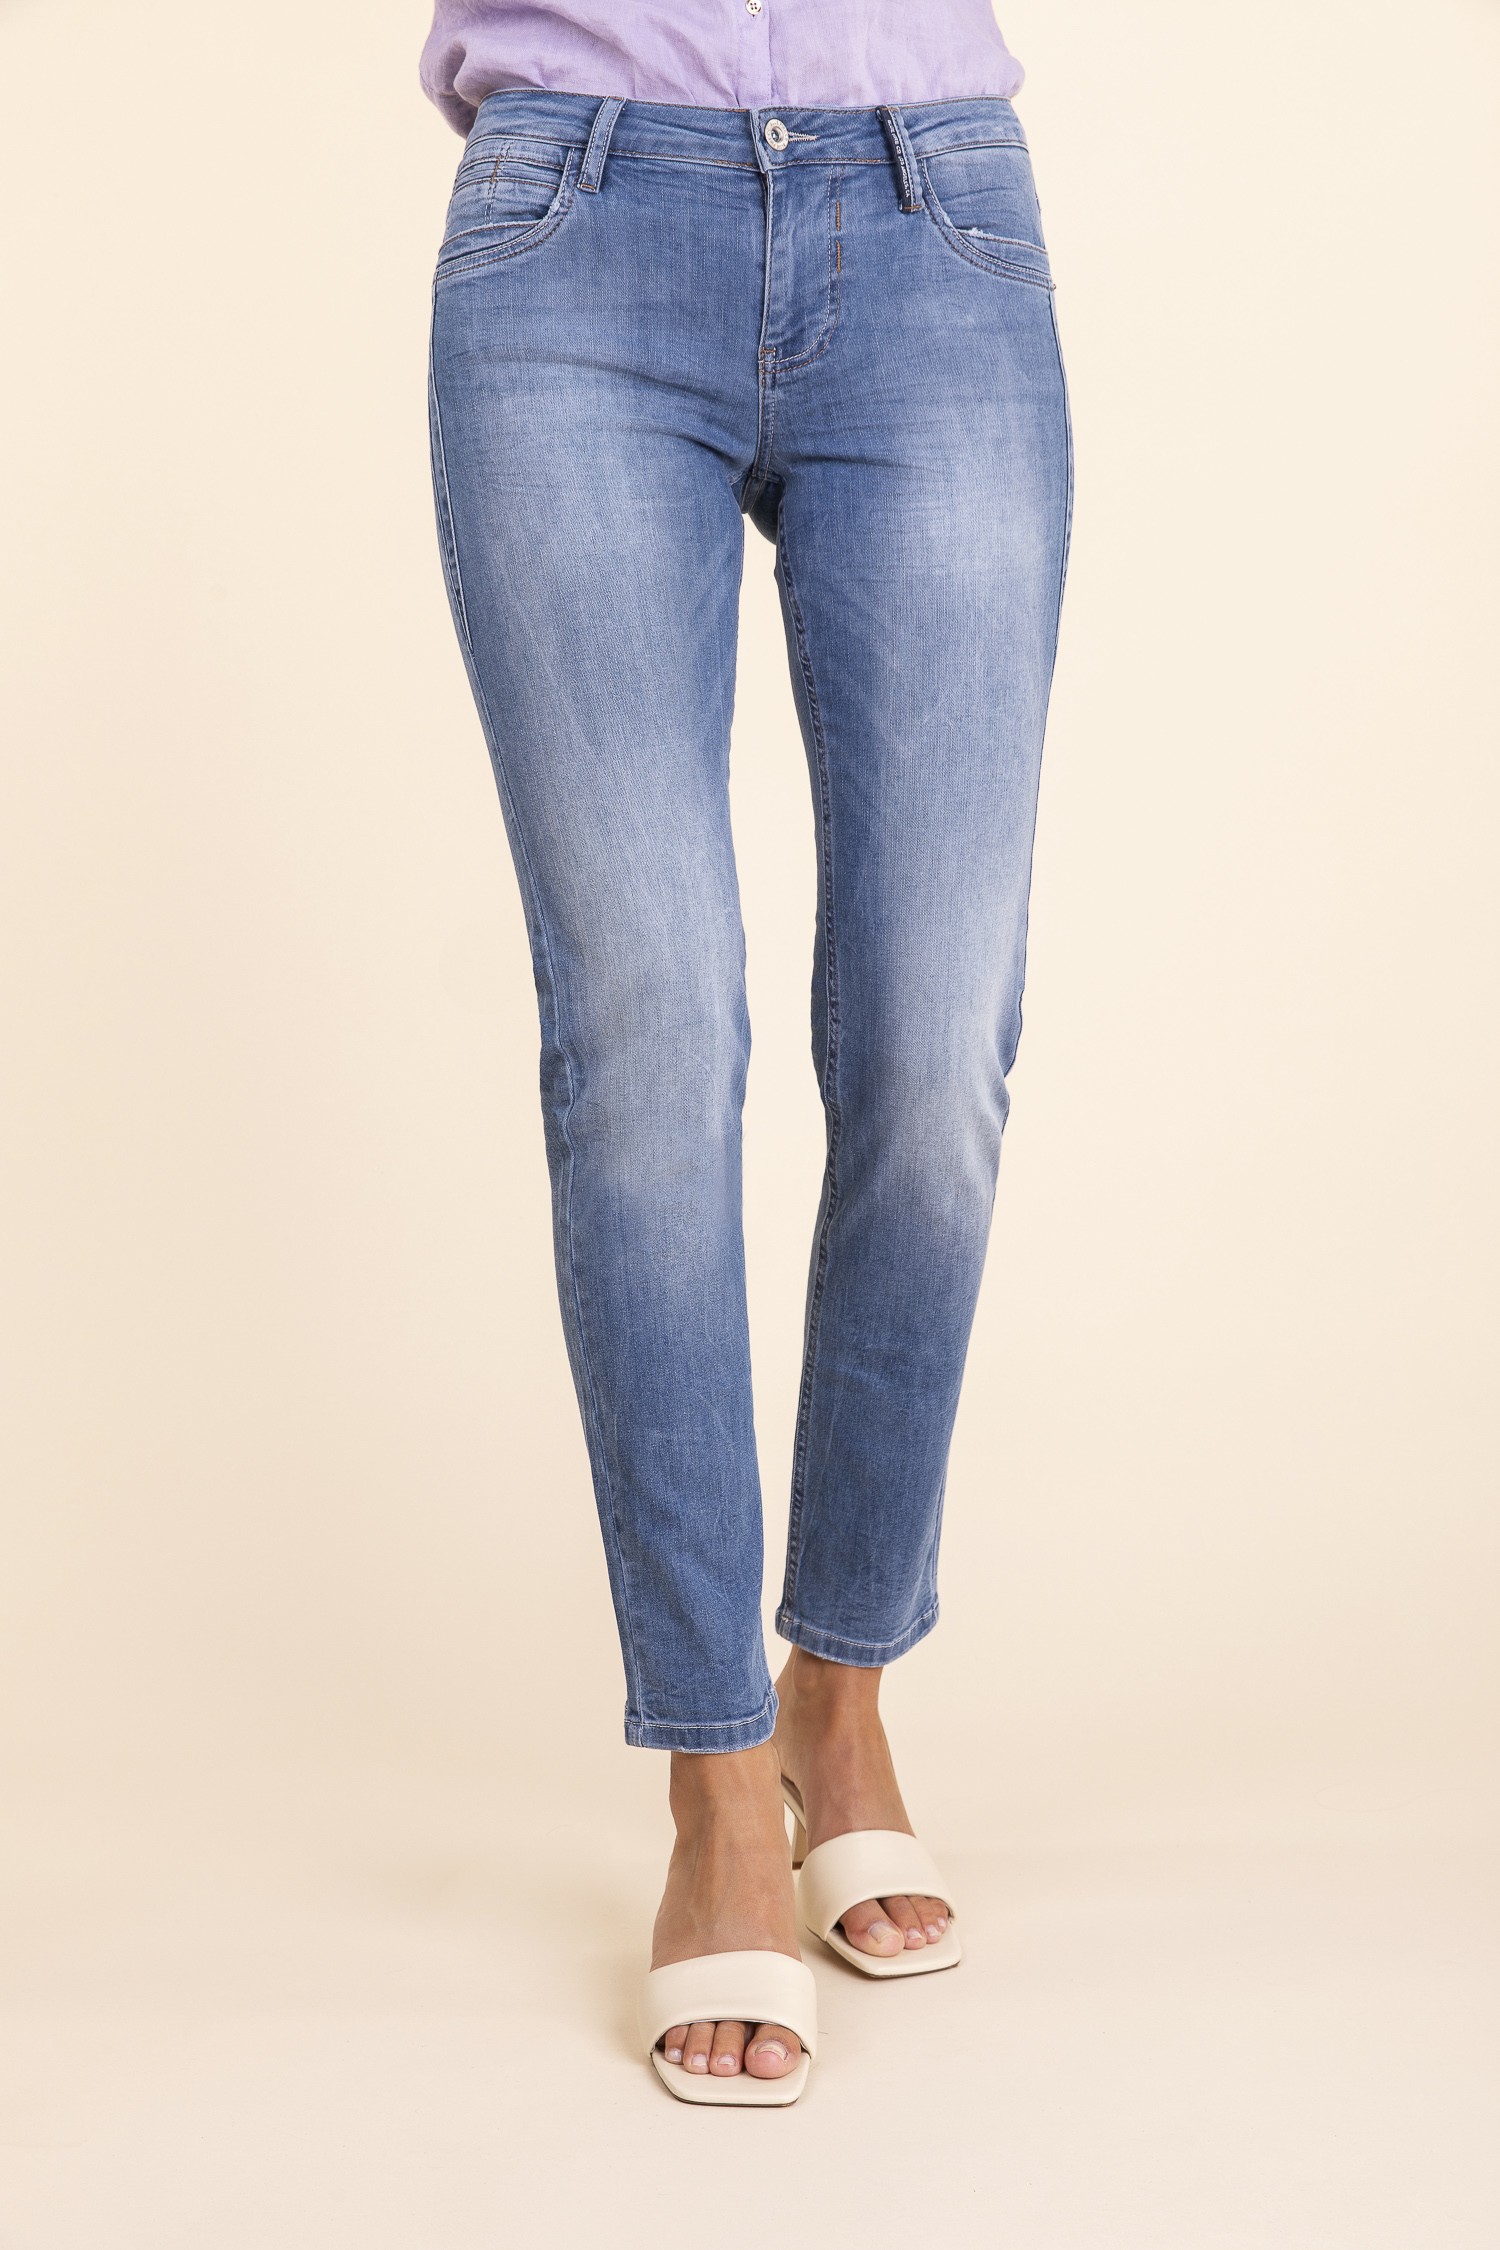 BLUE FIRE NANCY pacific 1001.234 | Blue Fire Nancy | Blue Fire Jeans ...